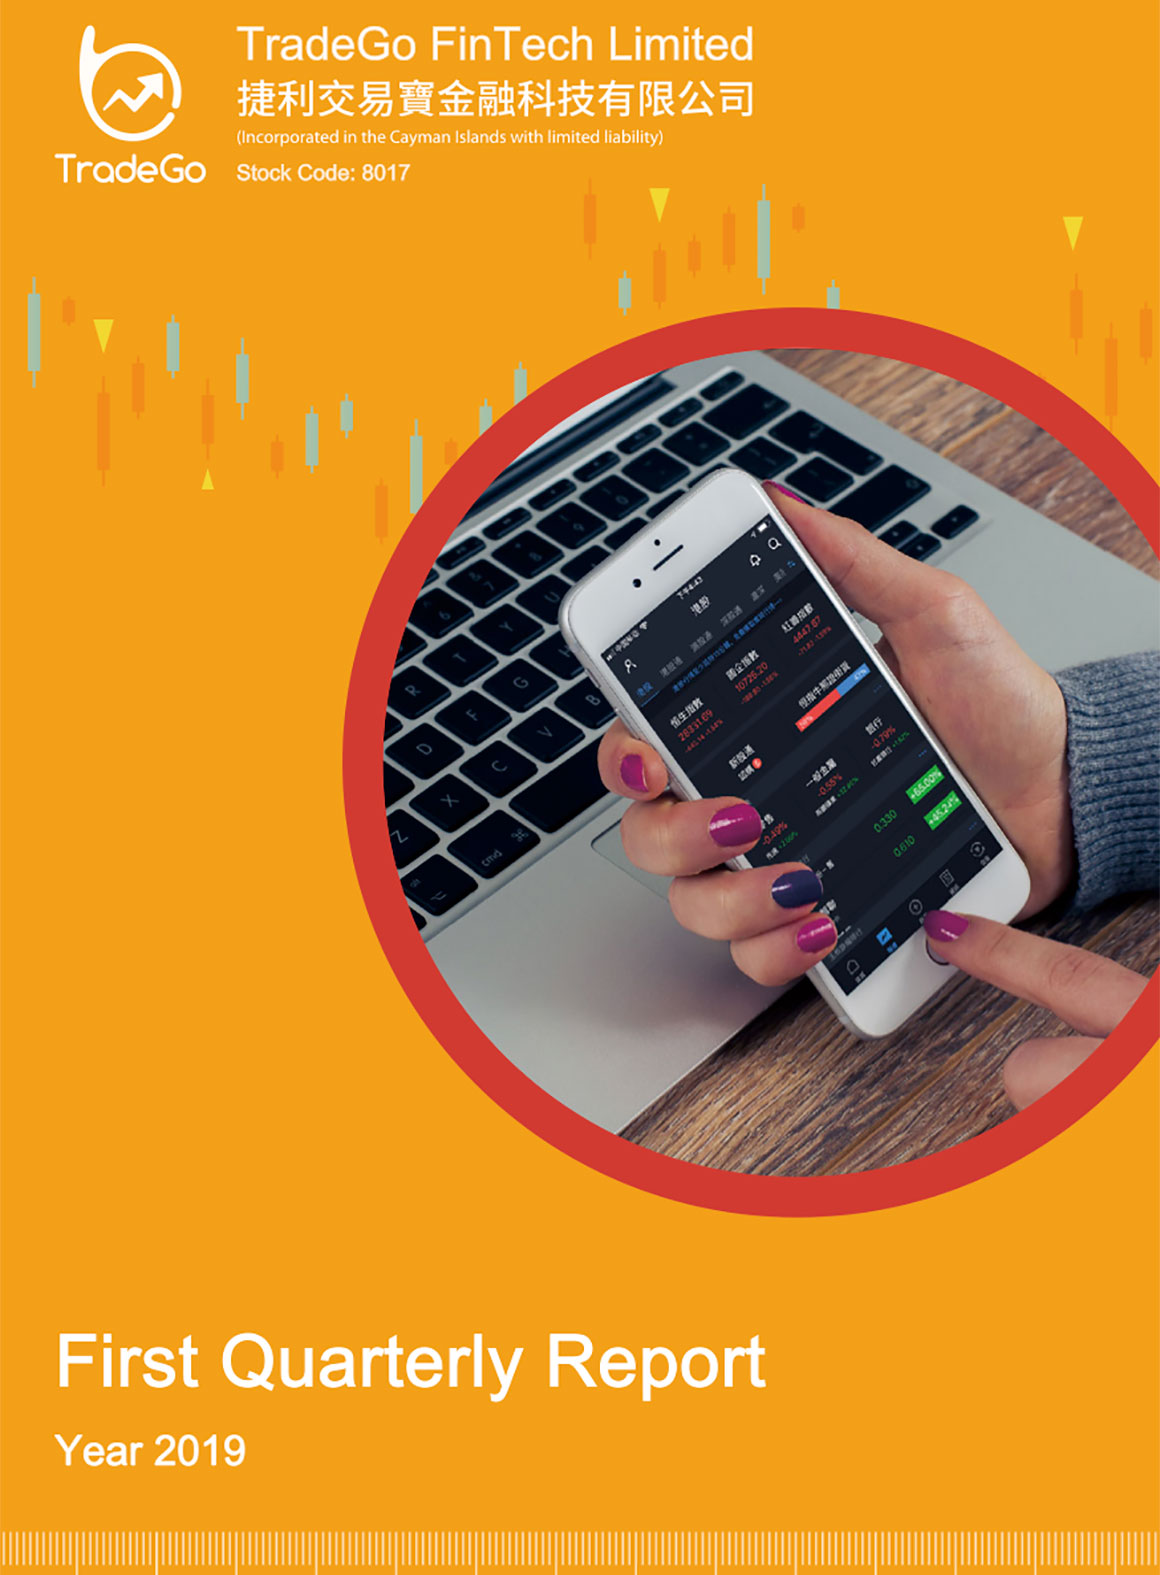 2019 First Quarterly Report 